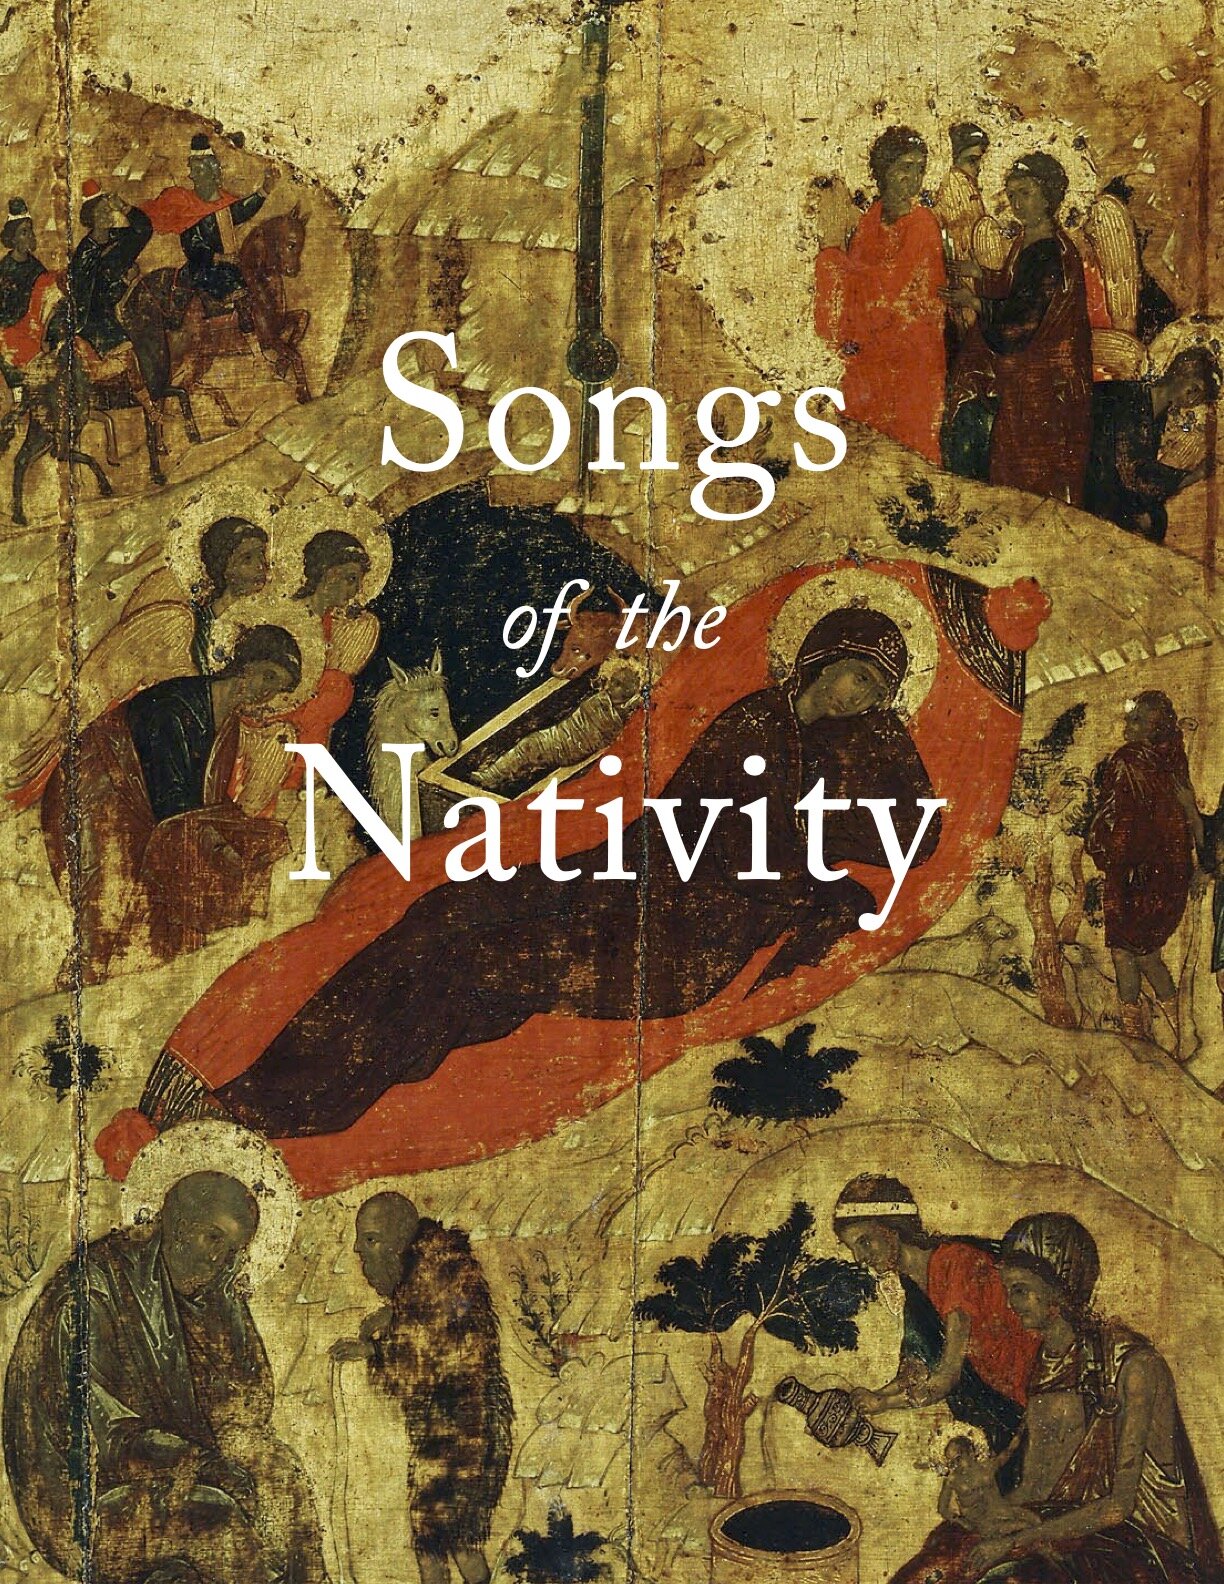 Advent 2020: Songs of the Nativity